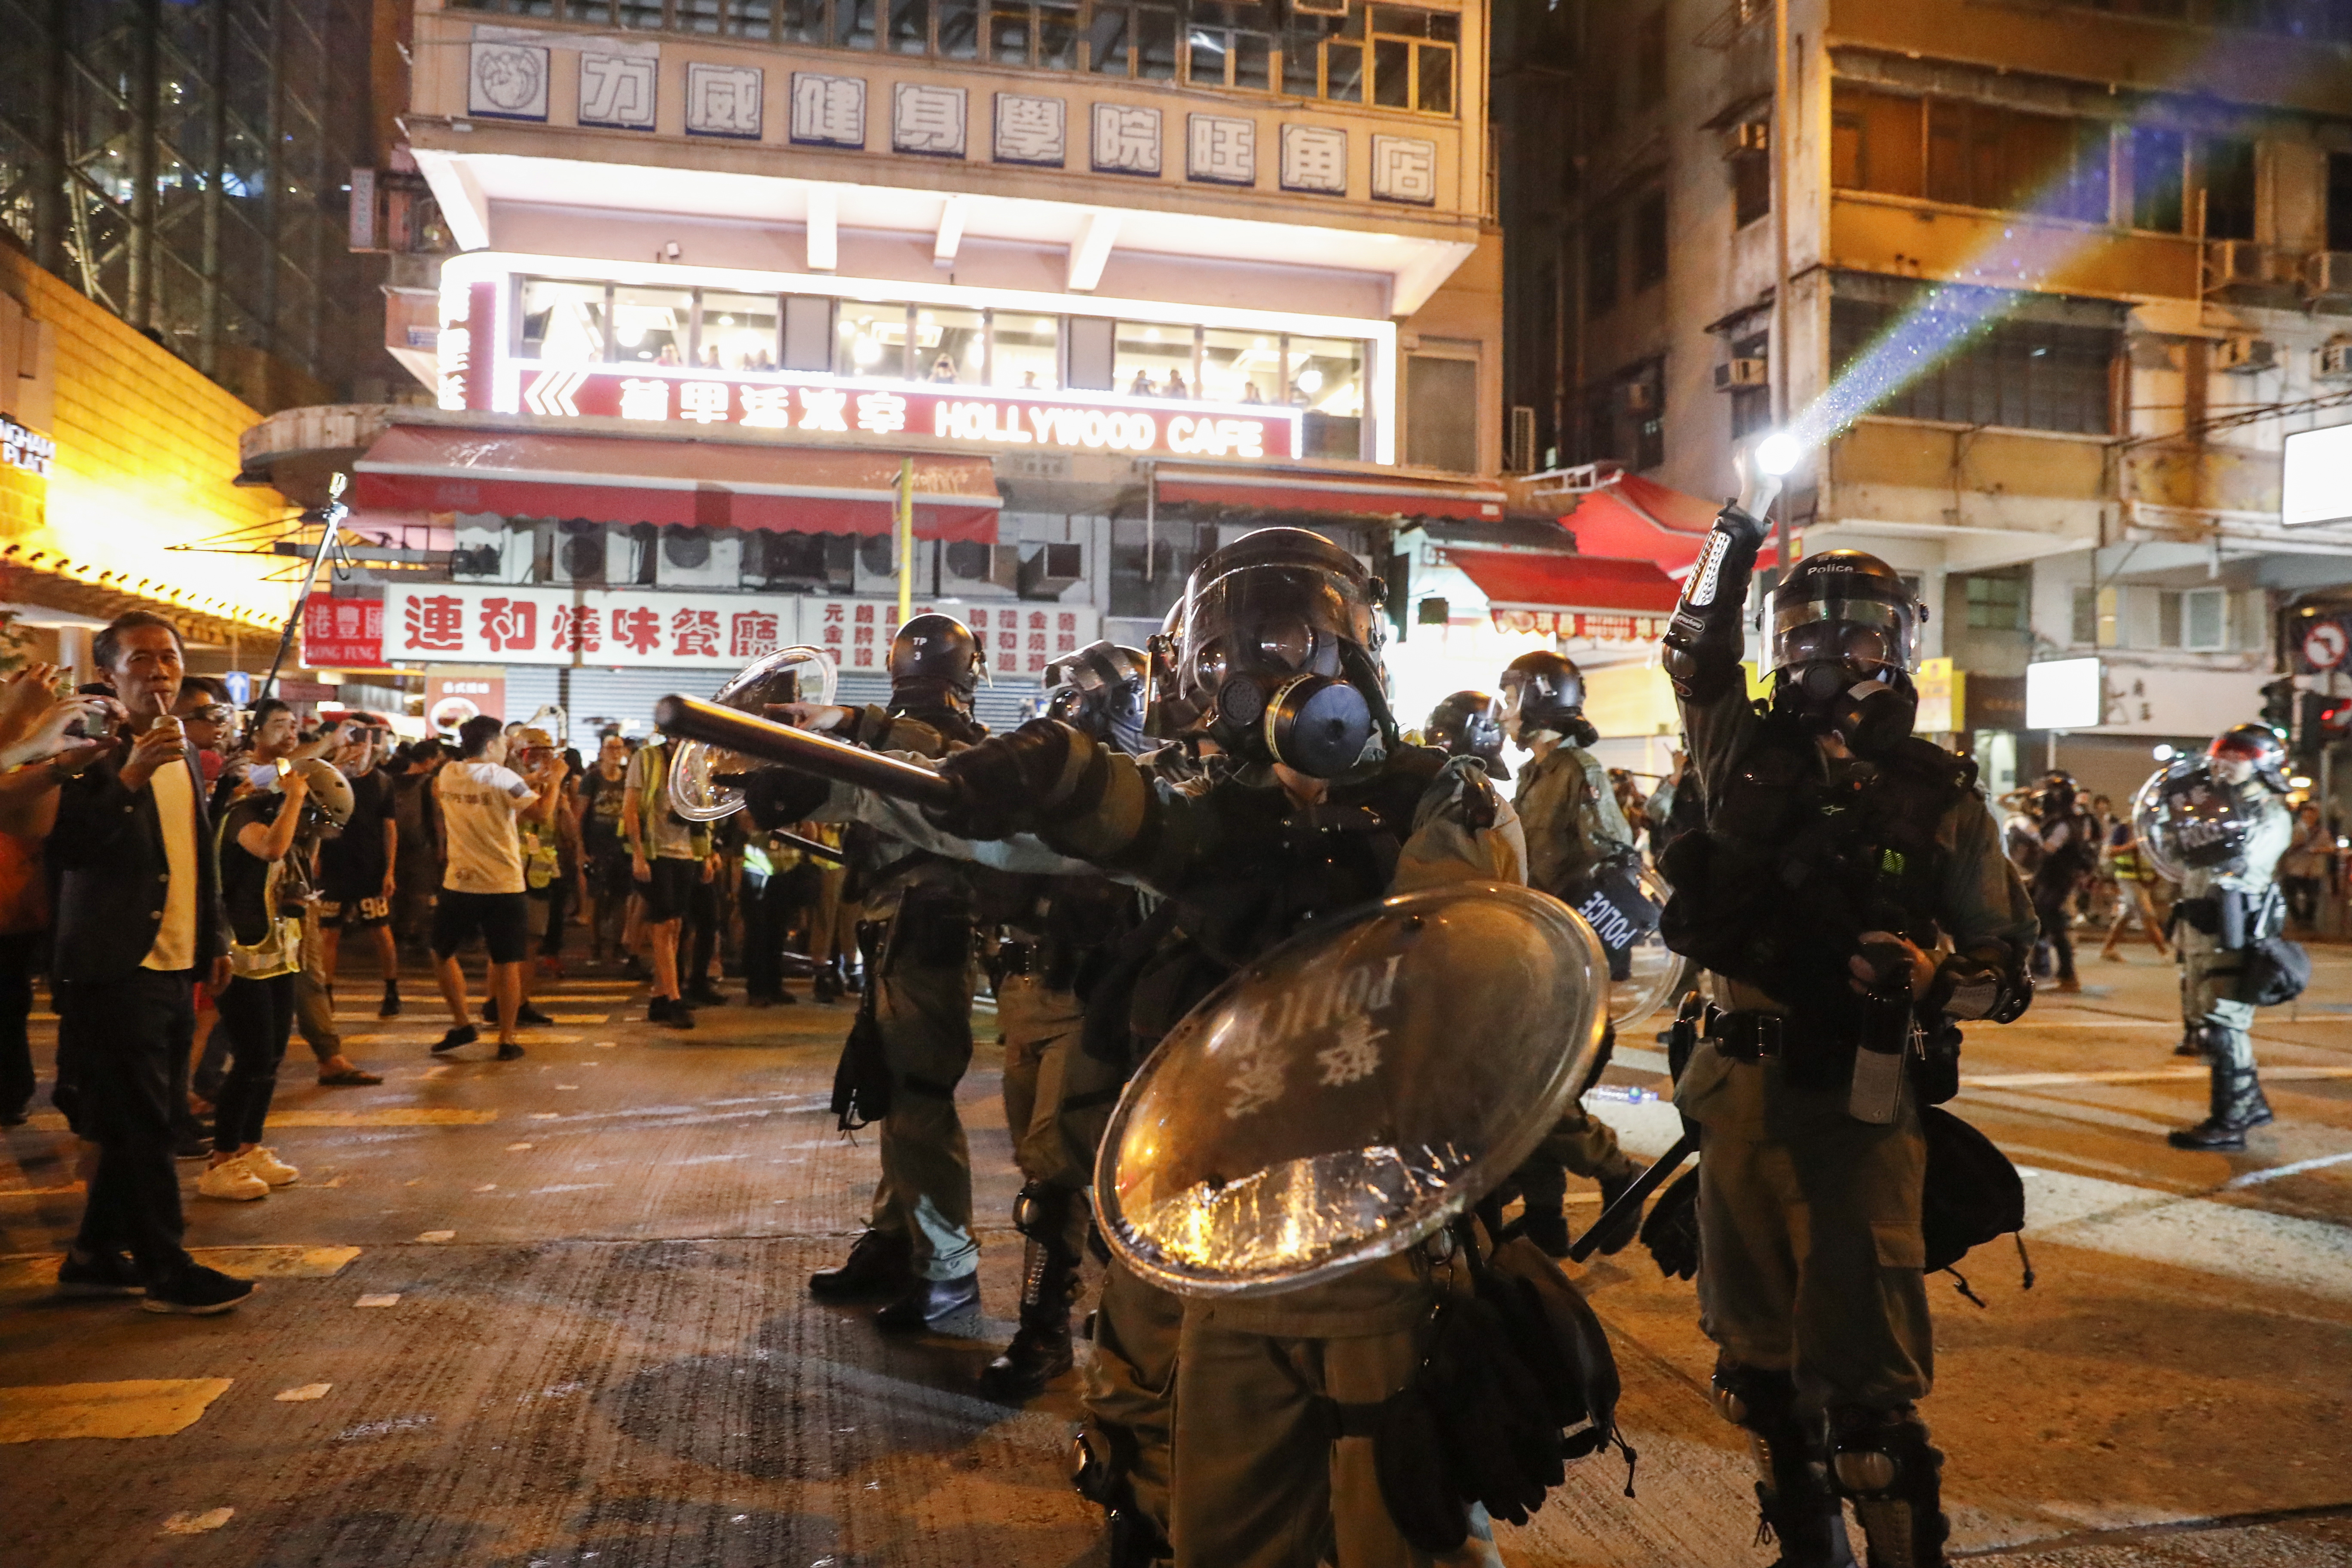 epa07823012 Riot police advance to disperse protesters attending a rally against police's violence at Mong Kok, in Hong Kong, China, 06 September 2019. Hong Kong Chief Executive Carrie Lam announced on 05 September the withdrawal of a controversial extradition bill that could allow the transfer of criminal suspects to mainland China after three months of protests across the territory. The full withdrawal of the bill, which was introduced in April and then suspended in June, is one of five key demands of protesters, who are demanding for full democratic rights.  EPA/JEON HEON-KYUN